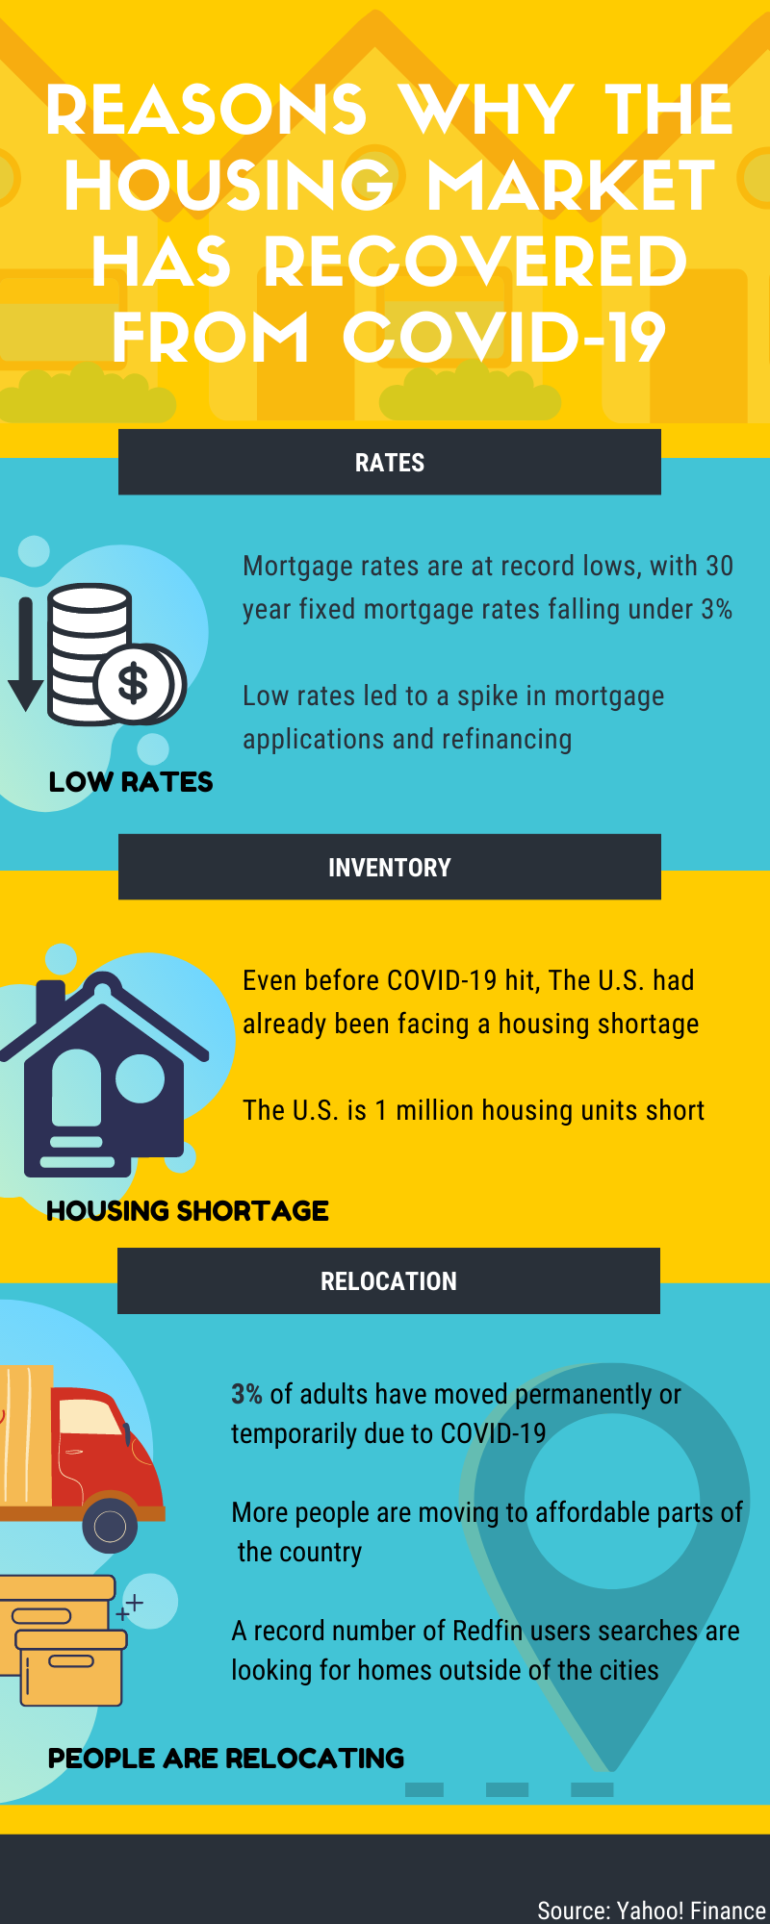 3 Reasons Why the Housing Market Recovered From Covid-19